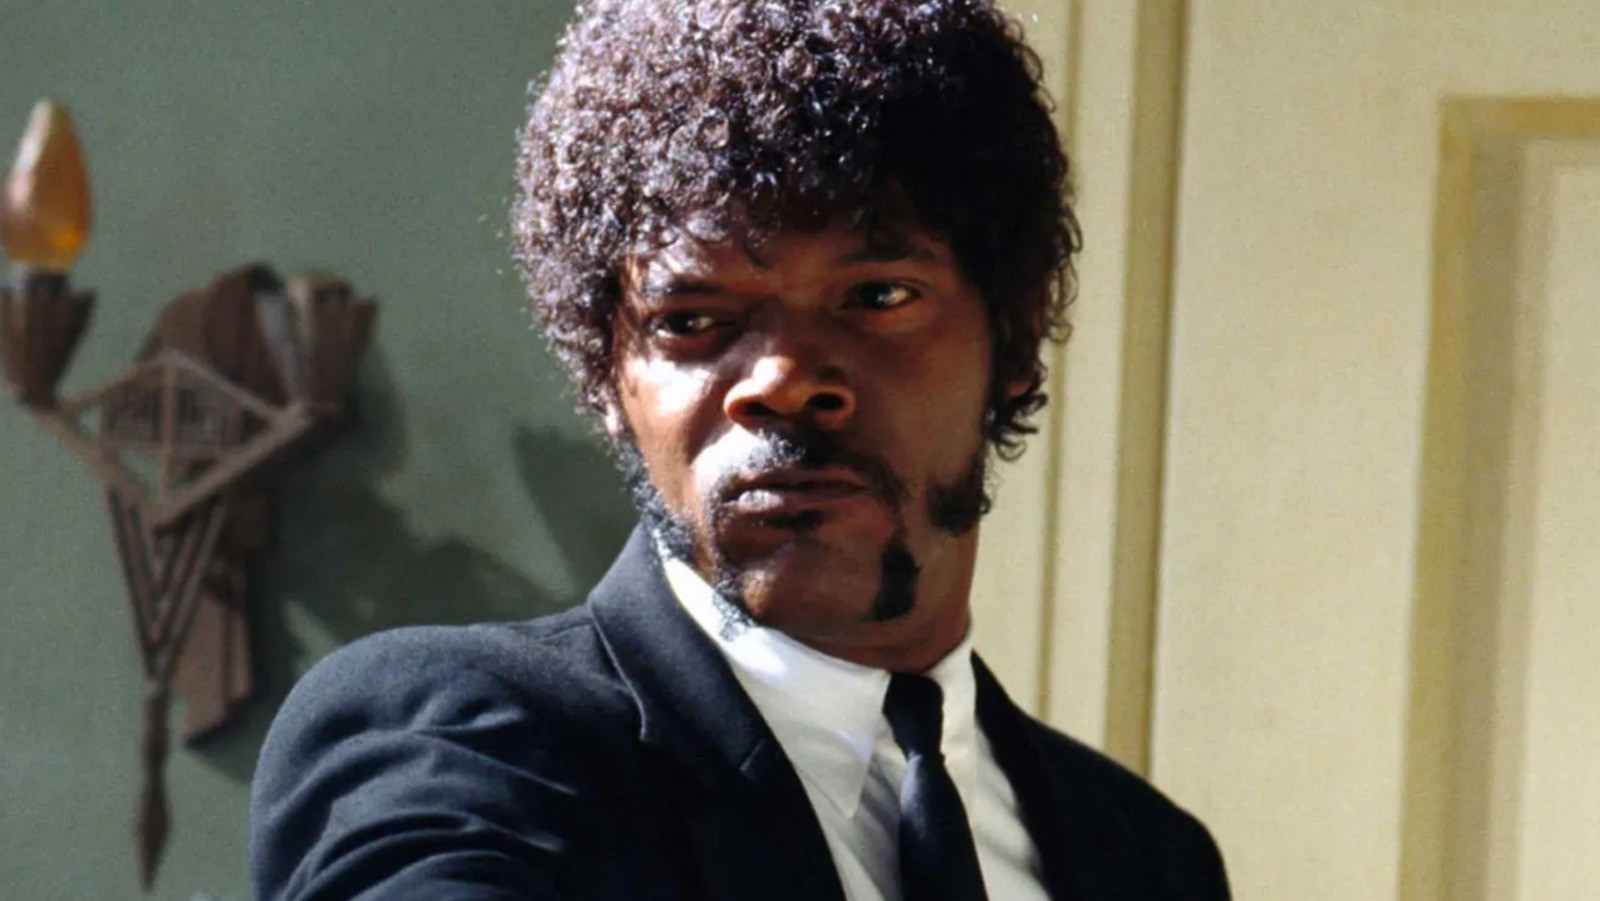 Samuel L. Jackson as one of the main characters in Pulp Fiction